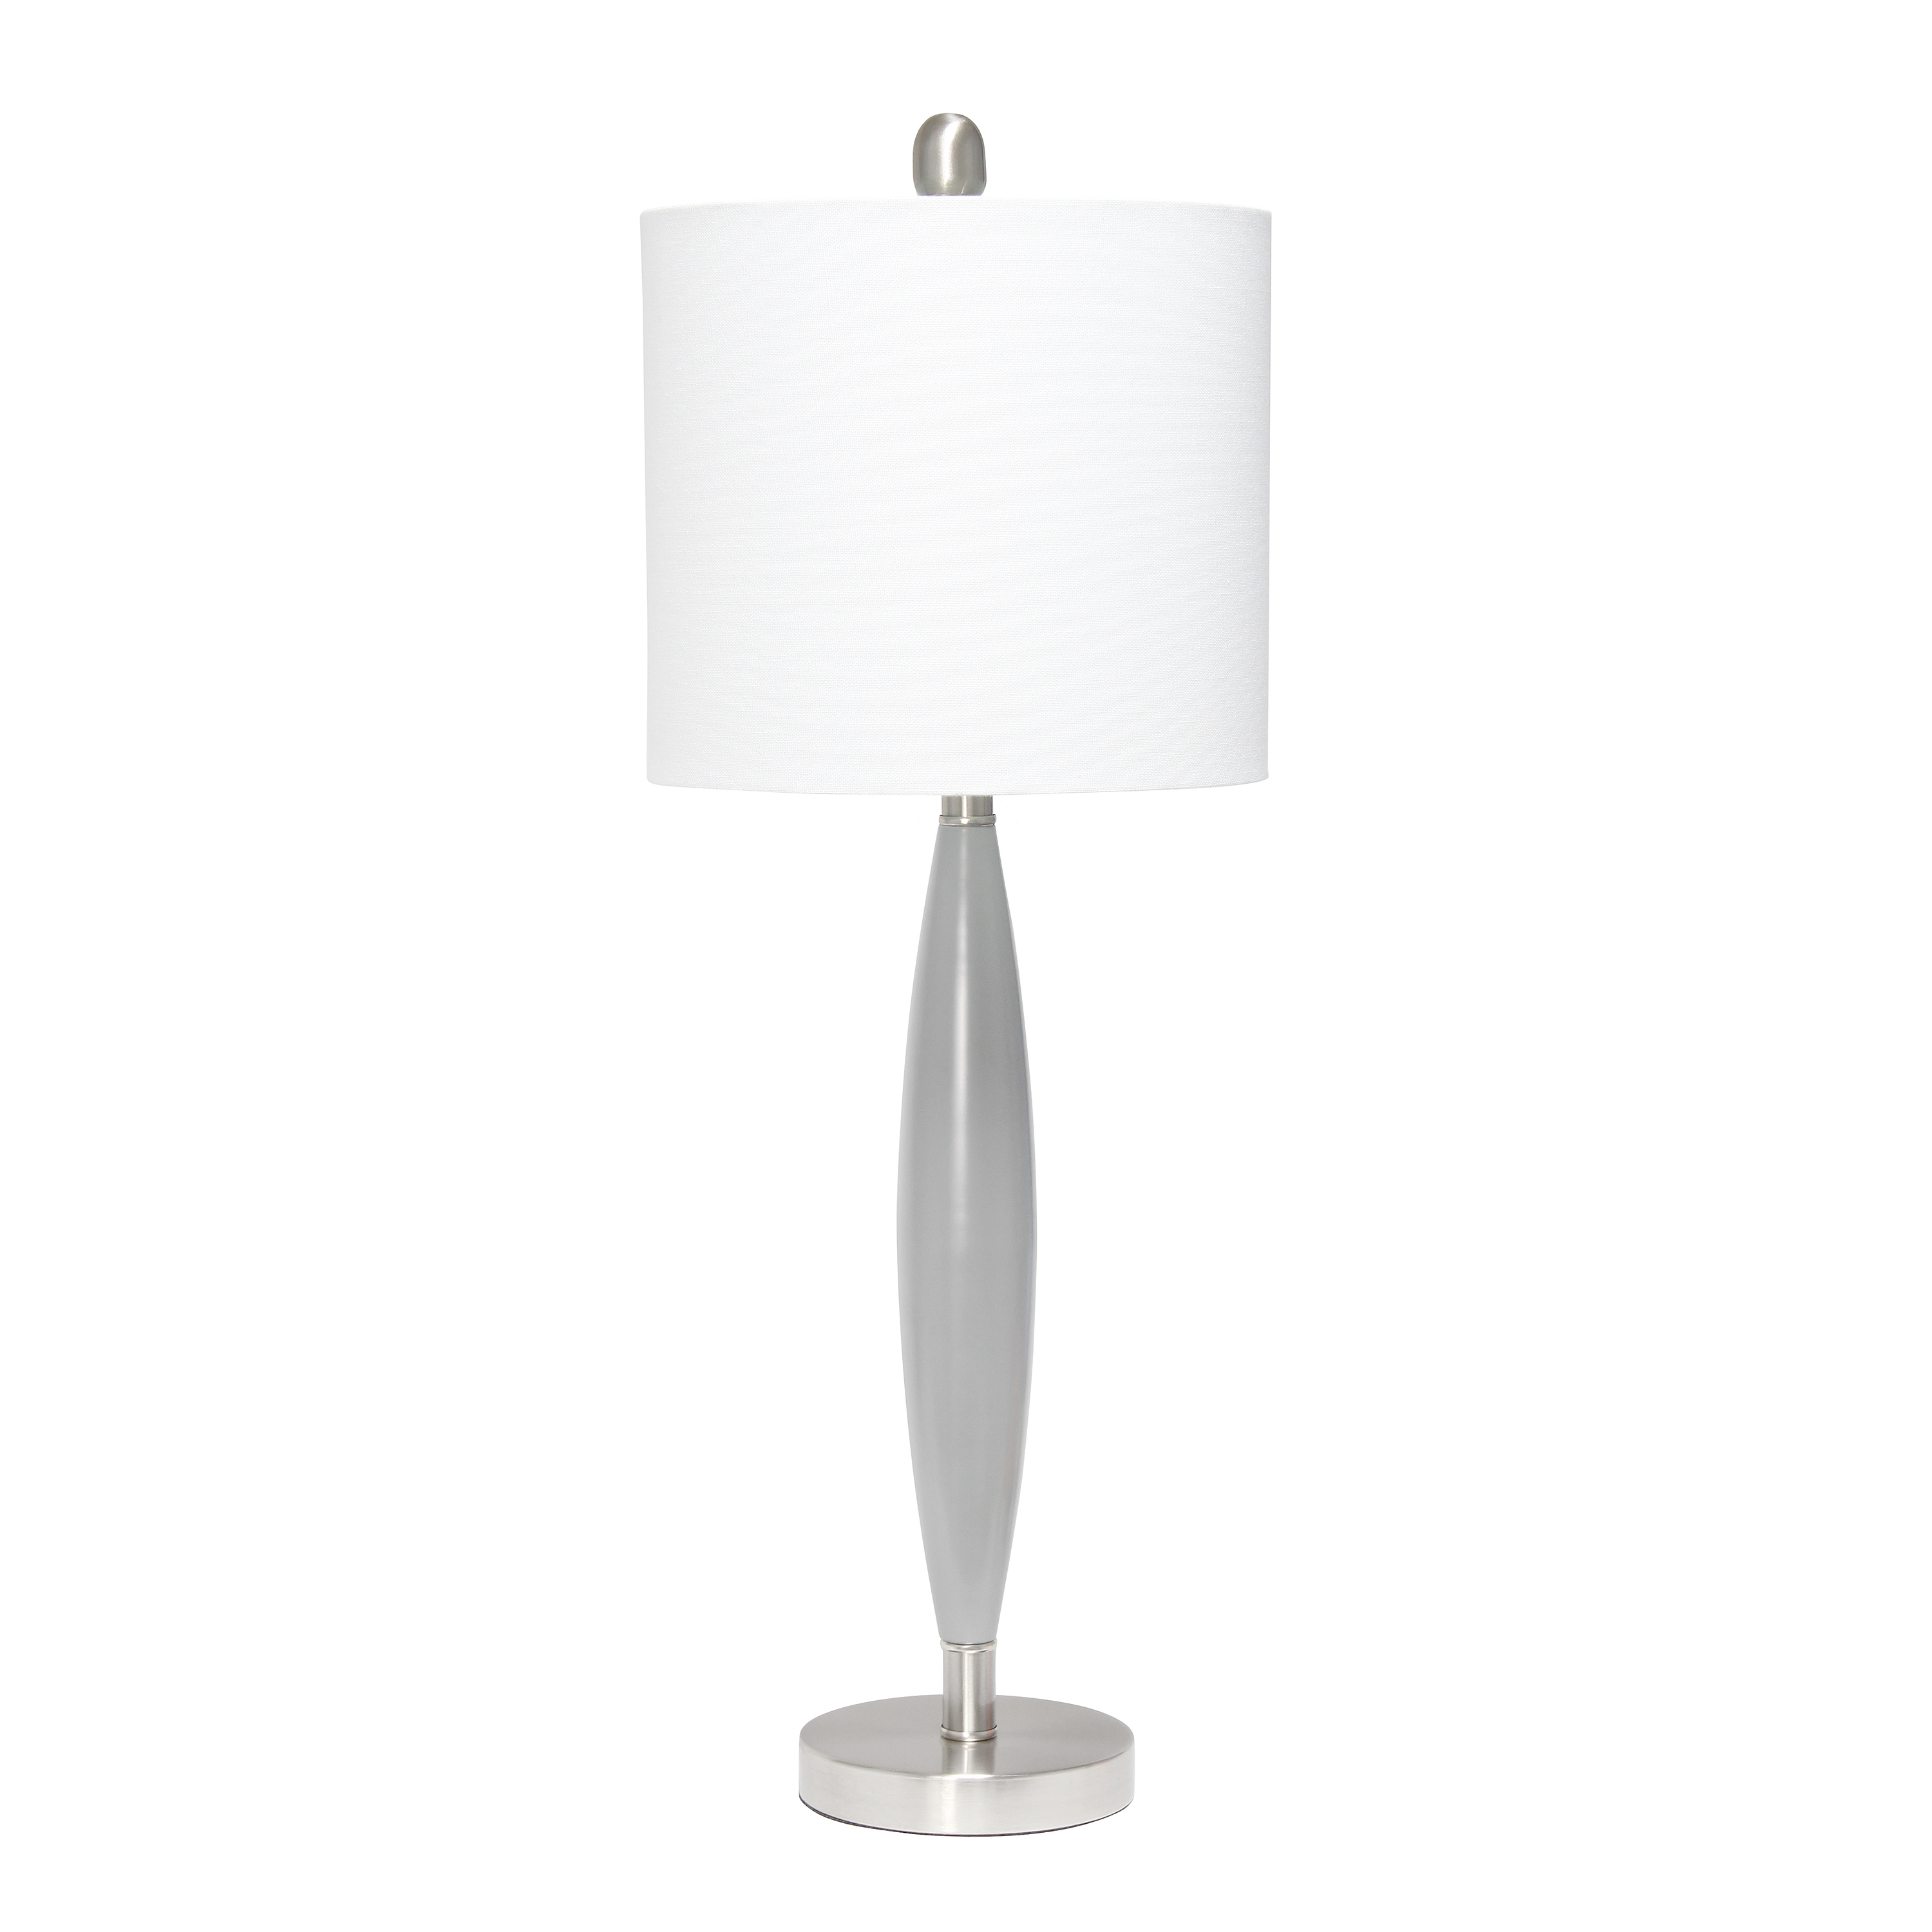  Lalia Home Stylus Table Lamp with White Fabric Shade, Gray